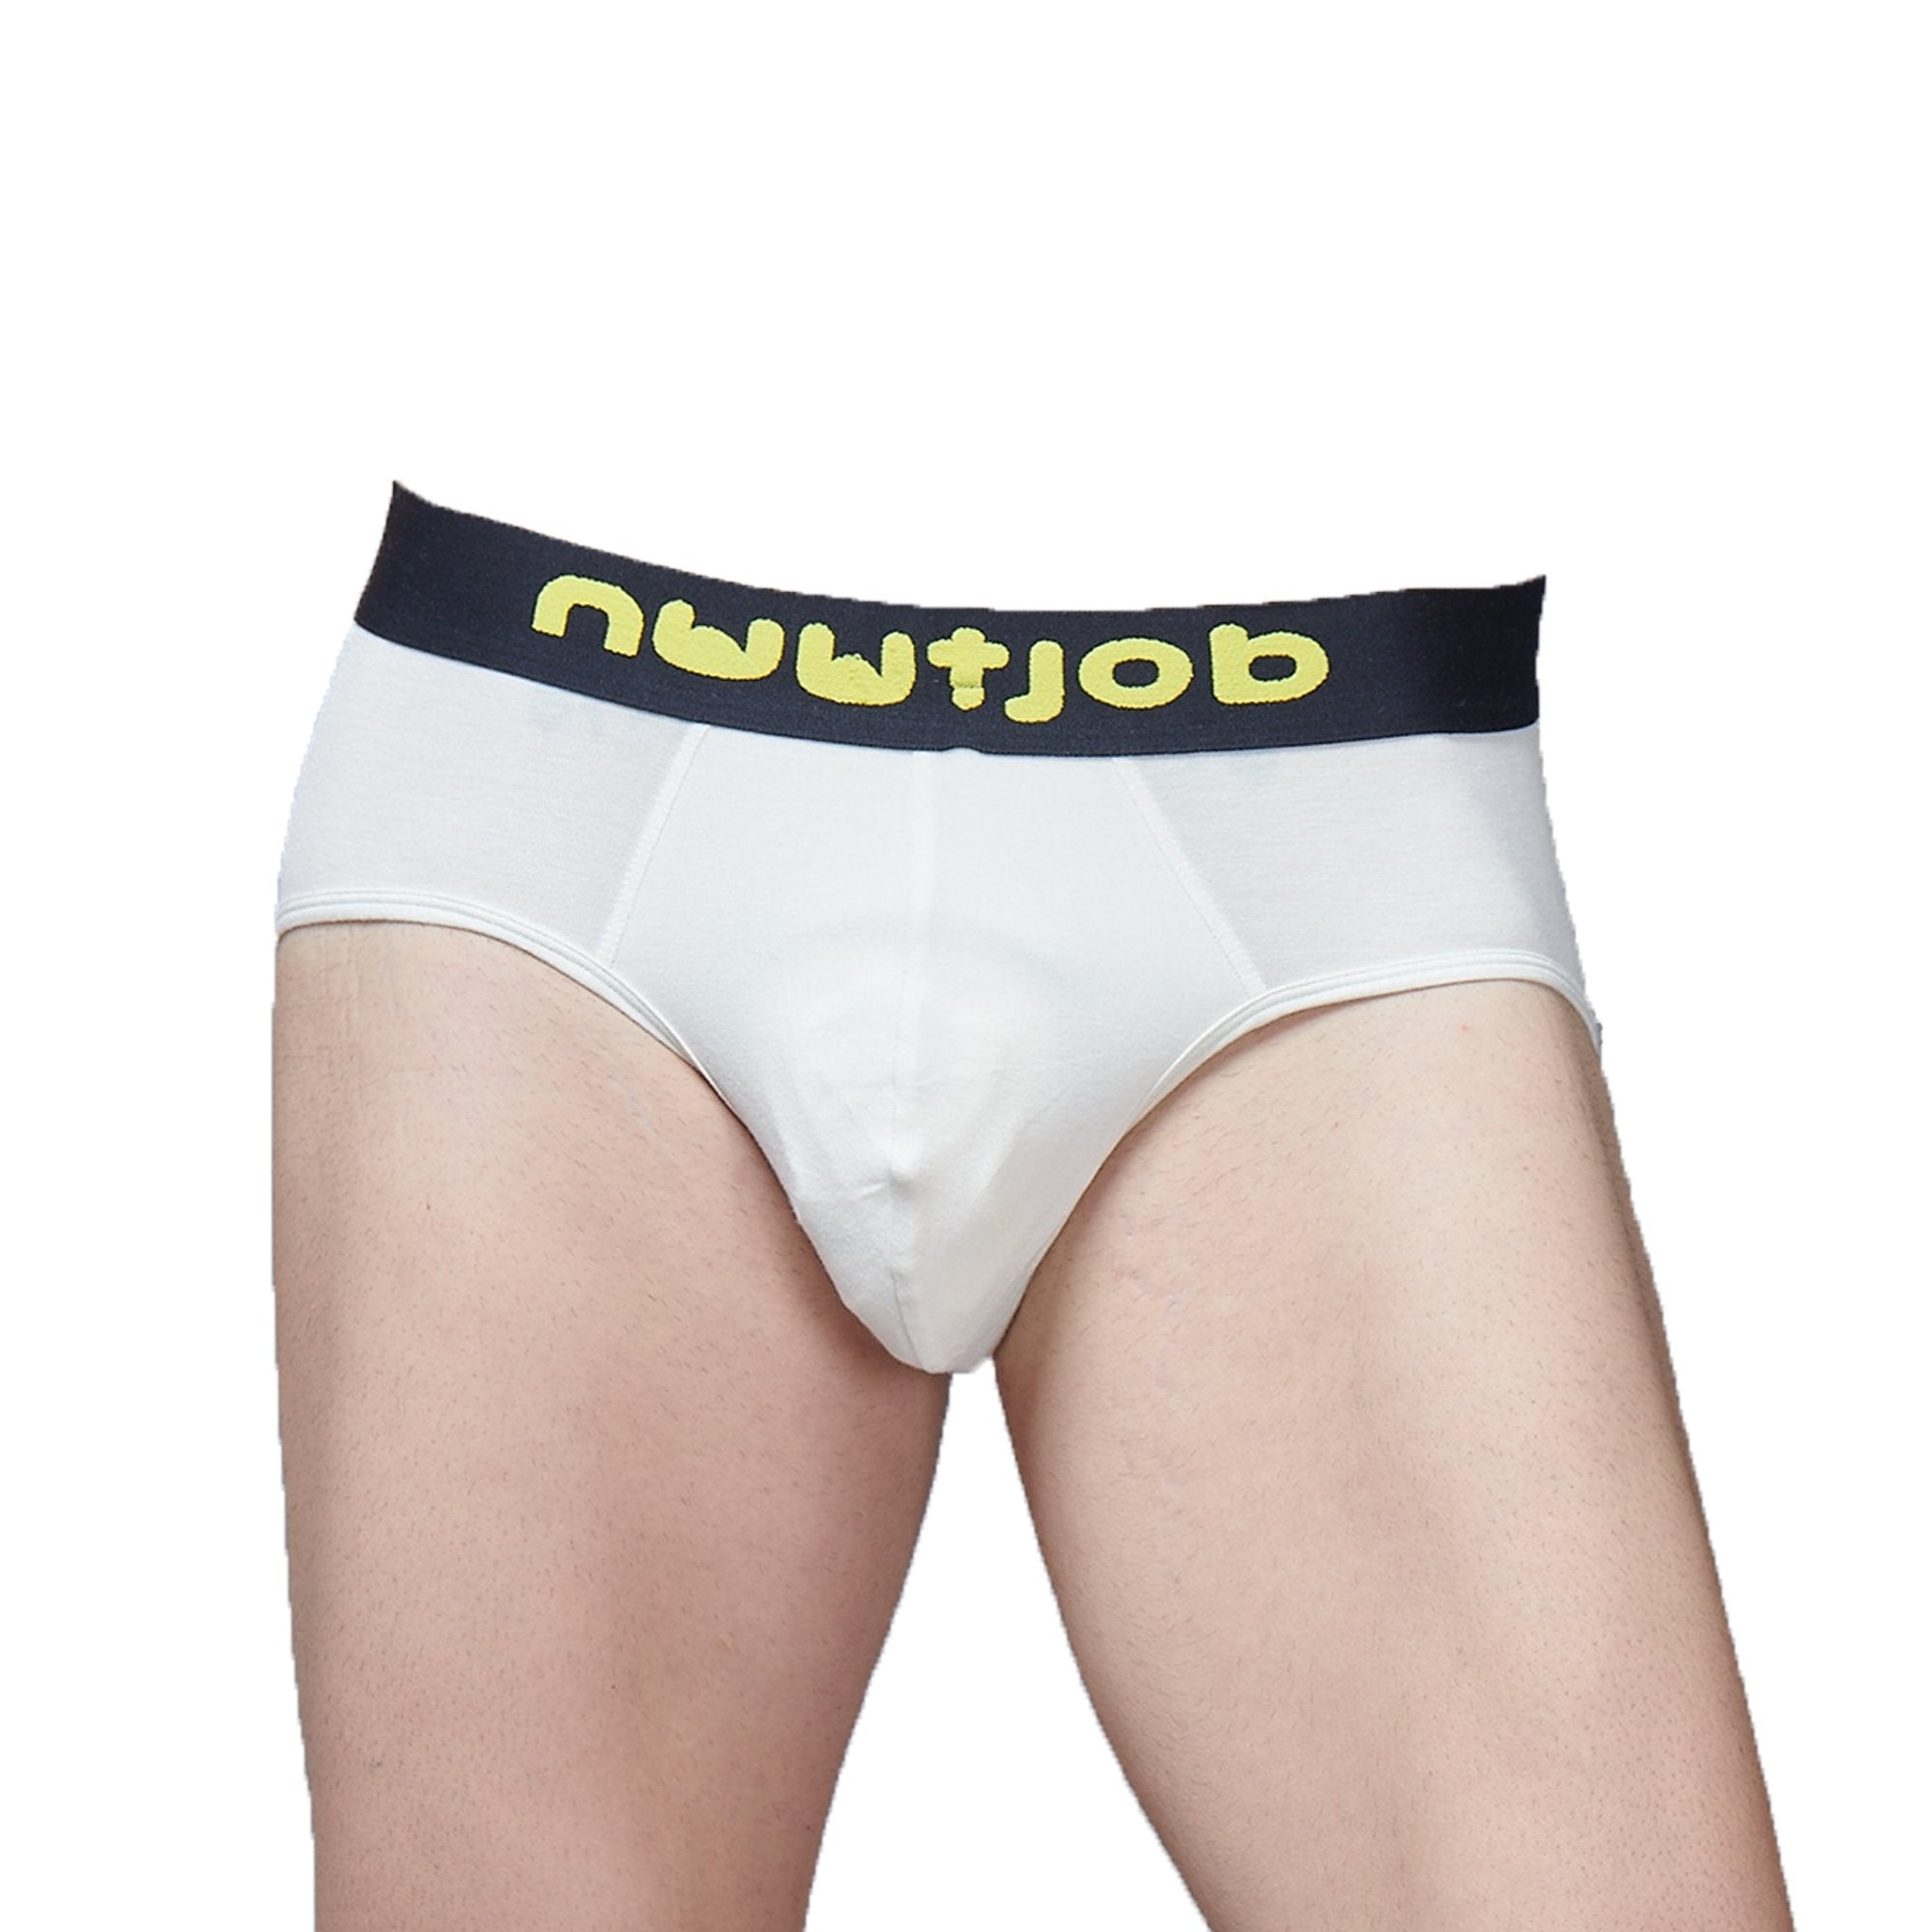 Nuutcase - Greige Natural Bamboo Underwear For Men